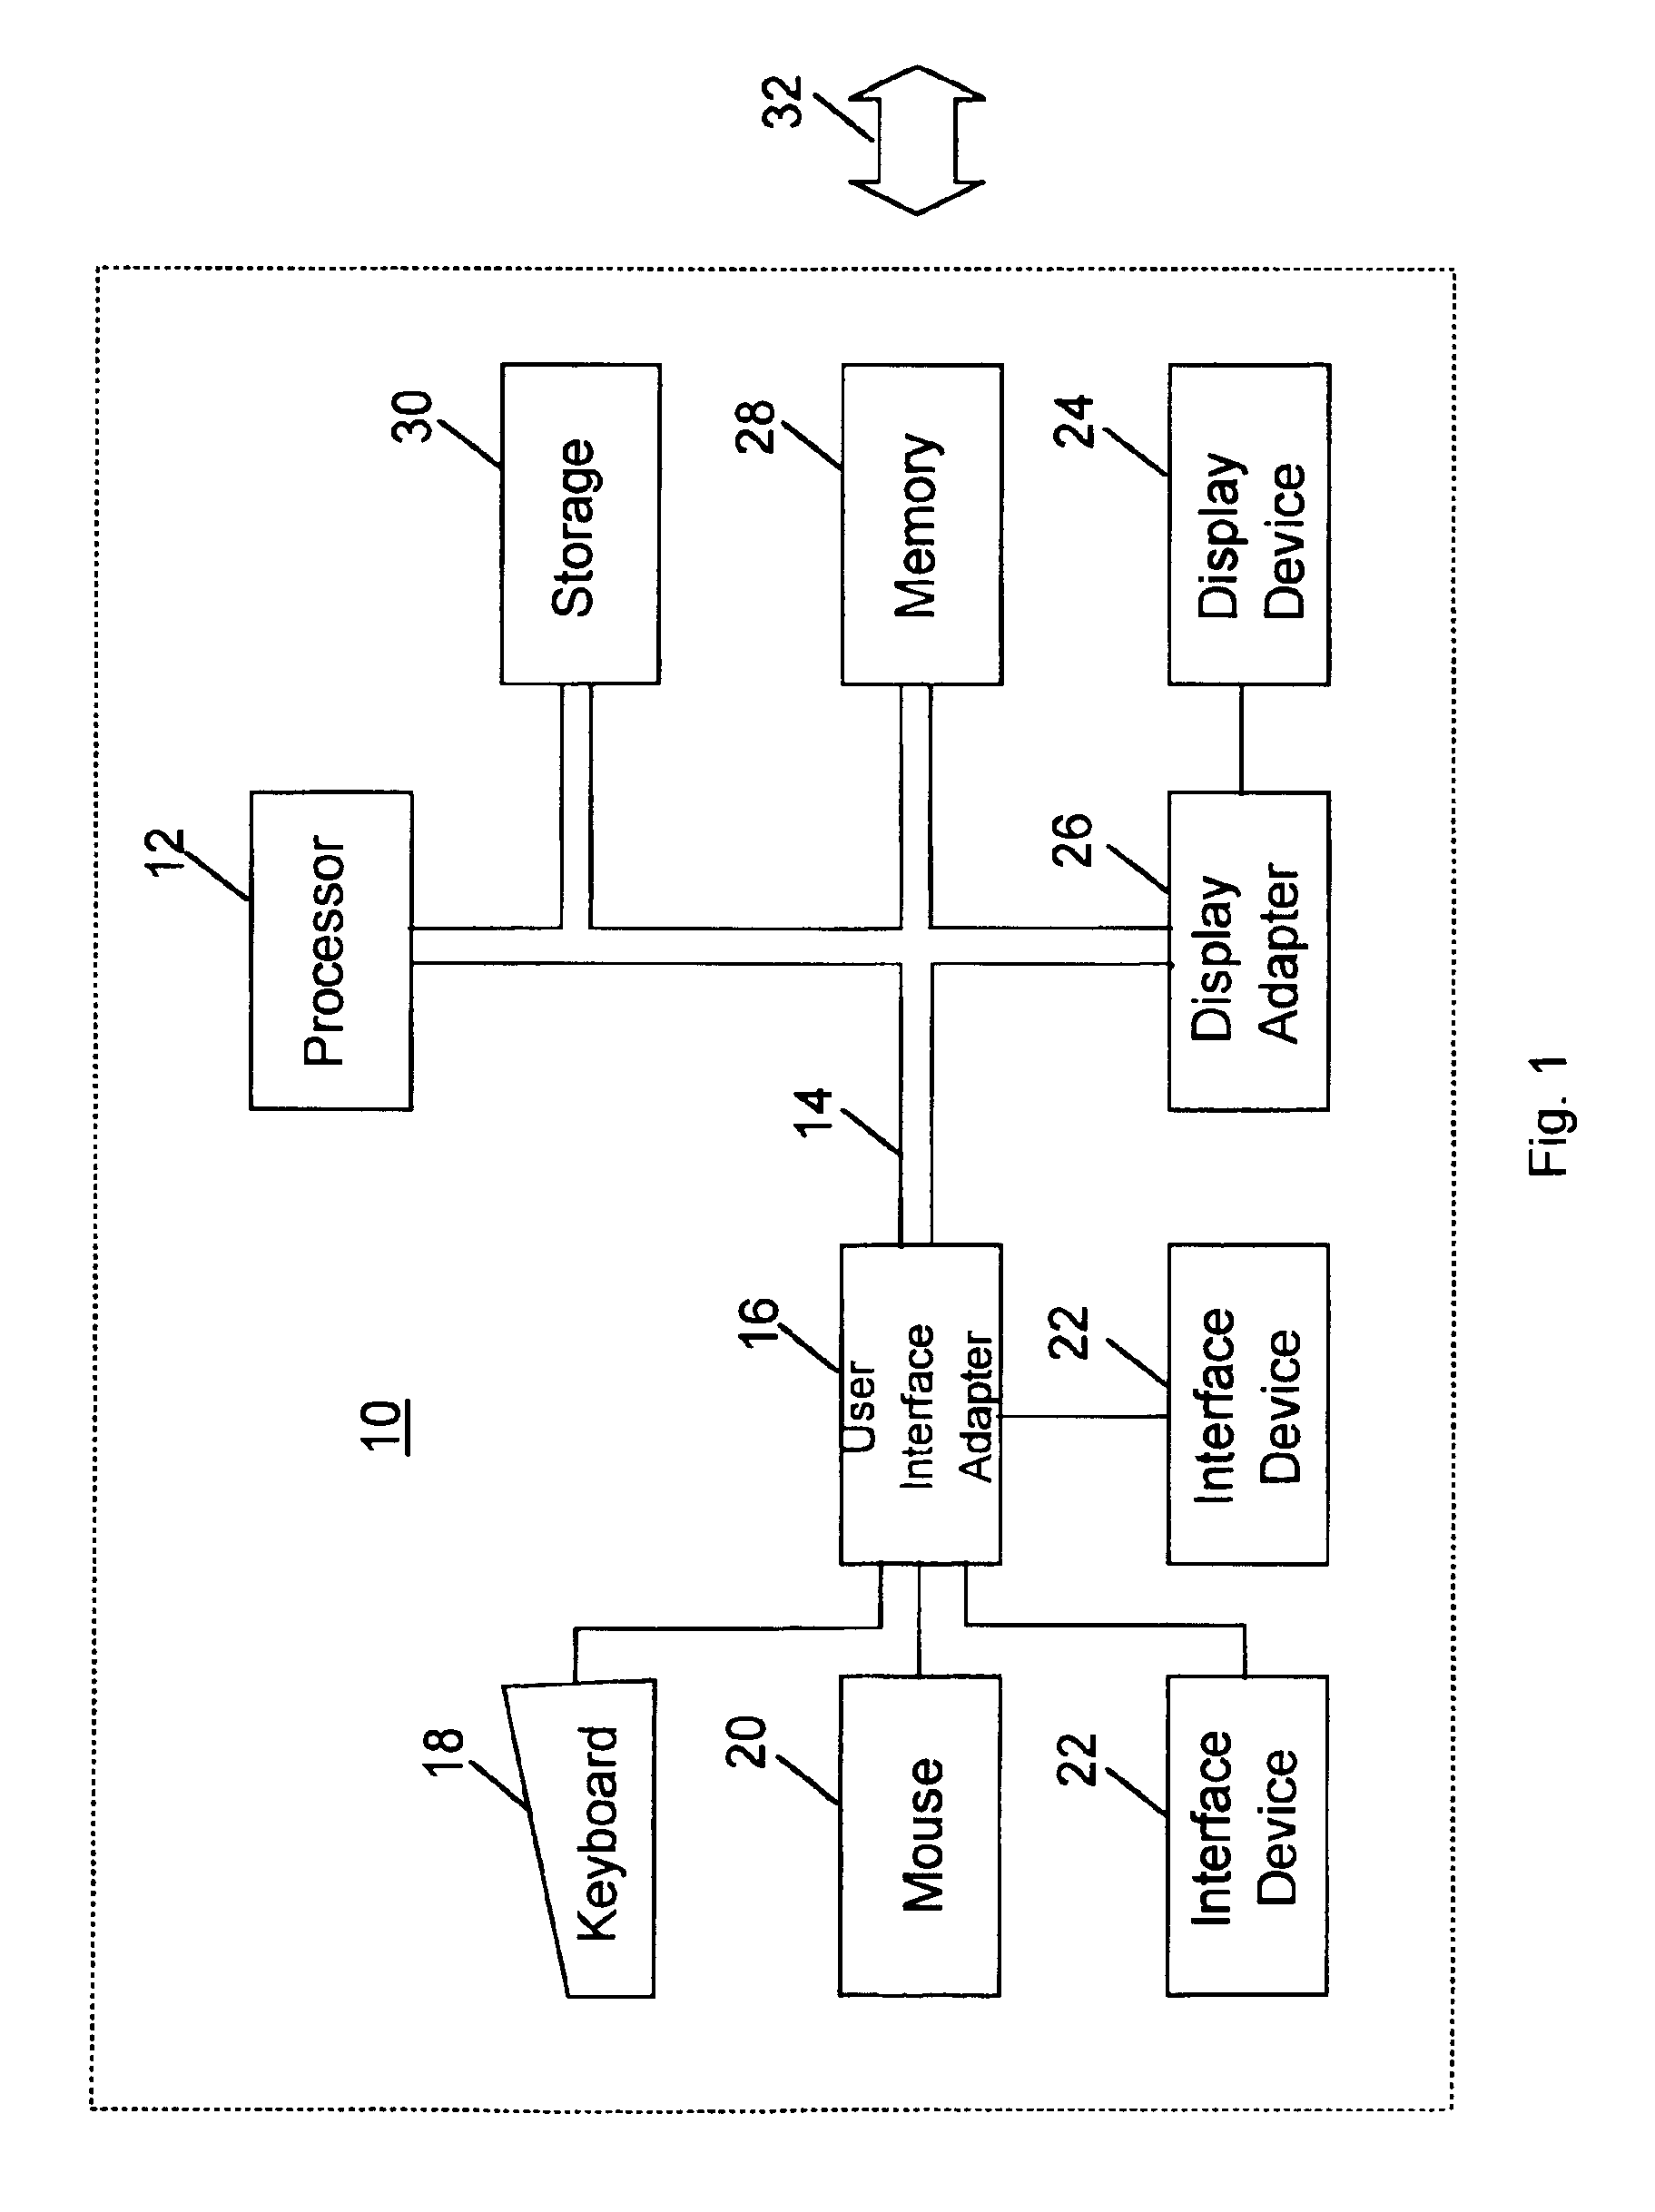 Selective data encryption using style sheet processing for decryption by a group clerk